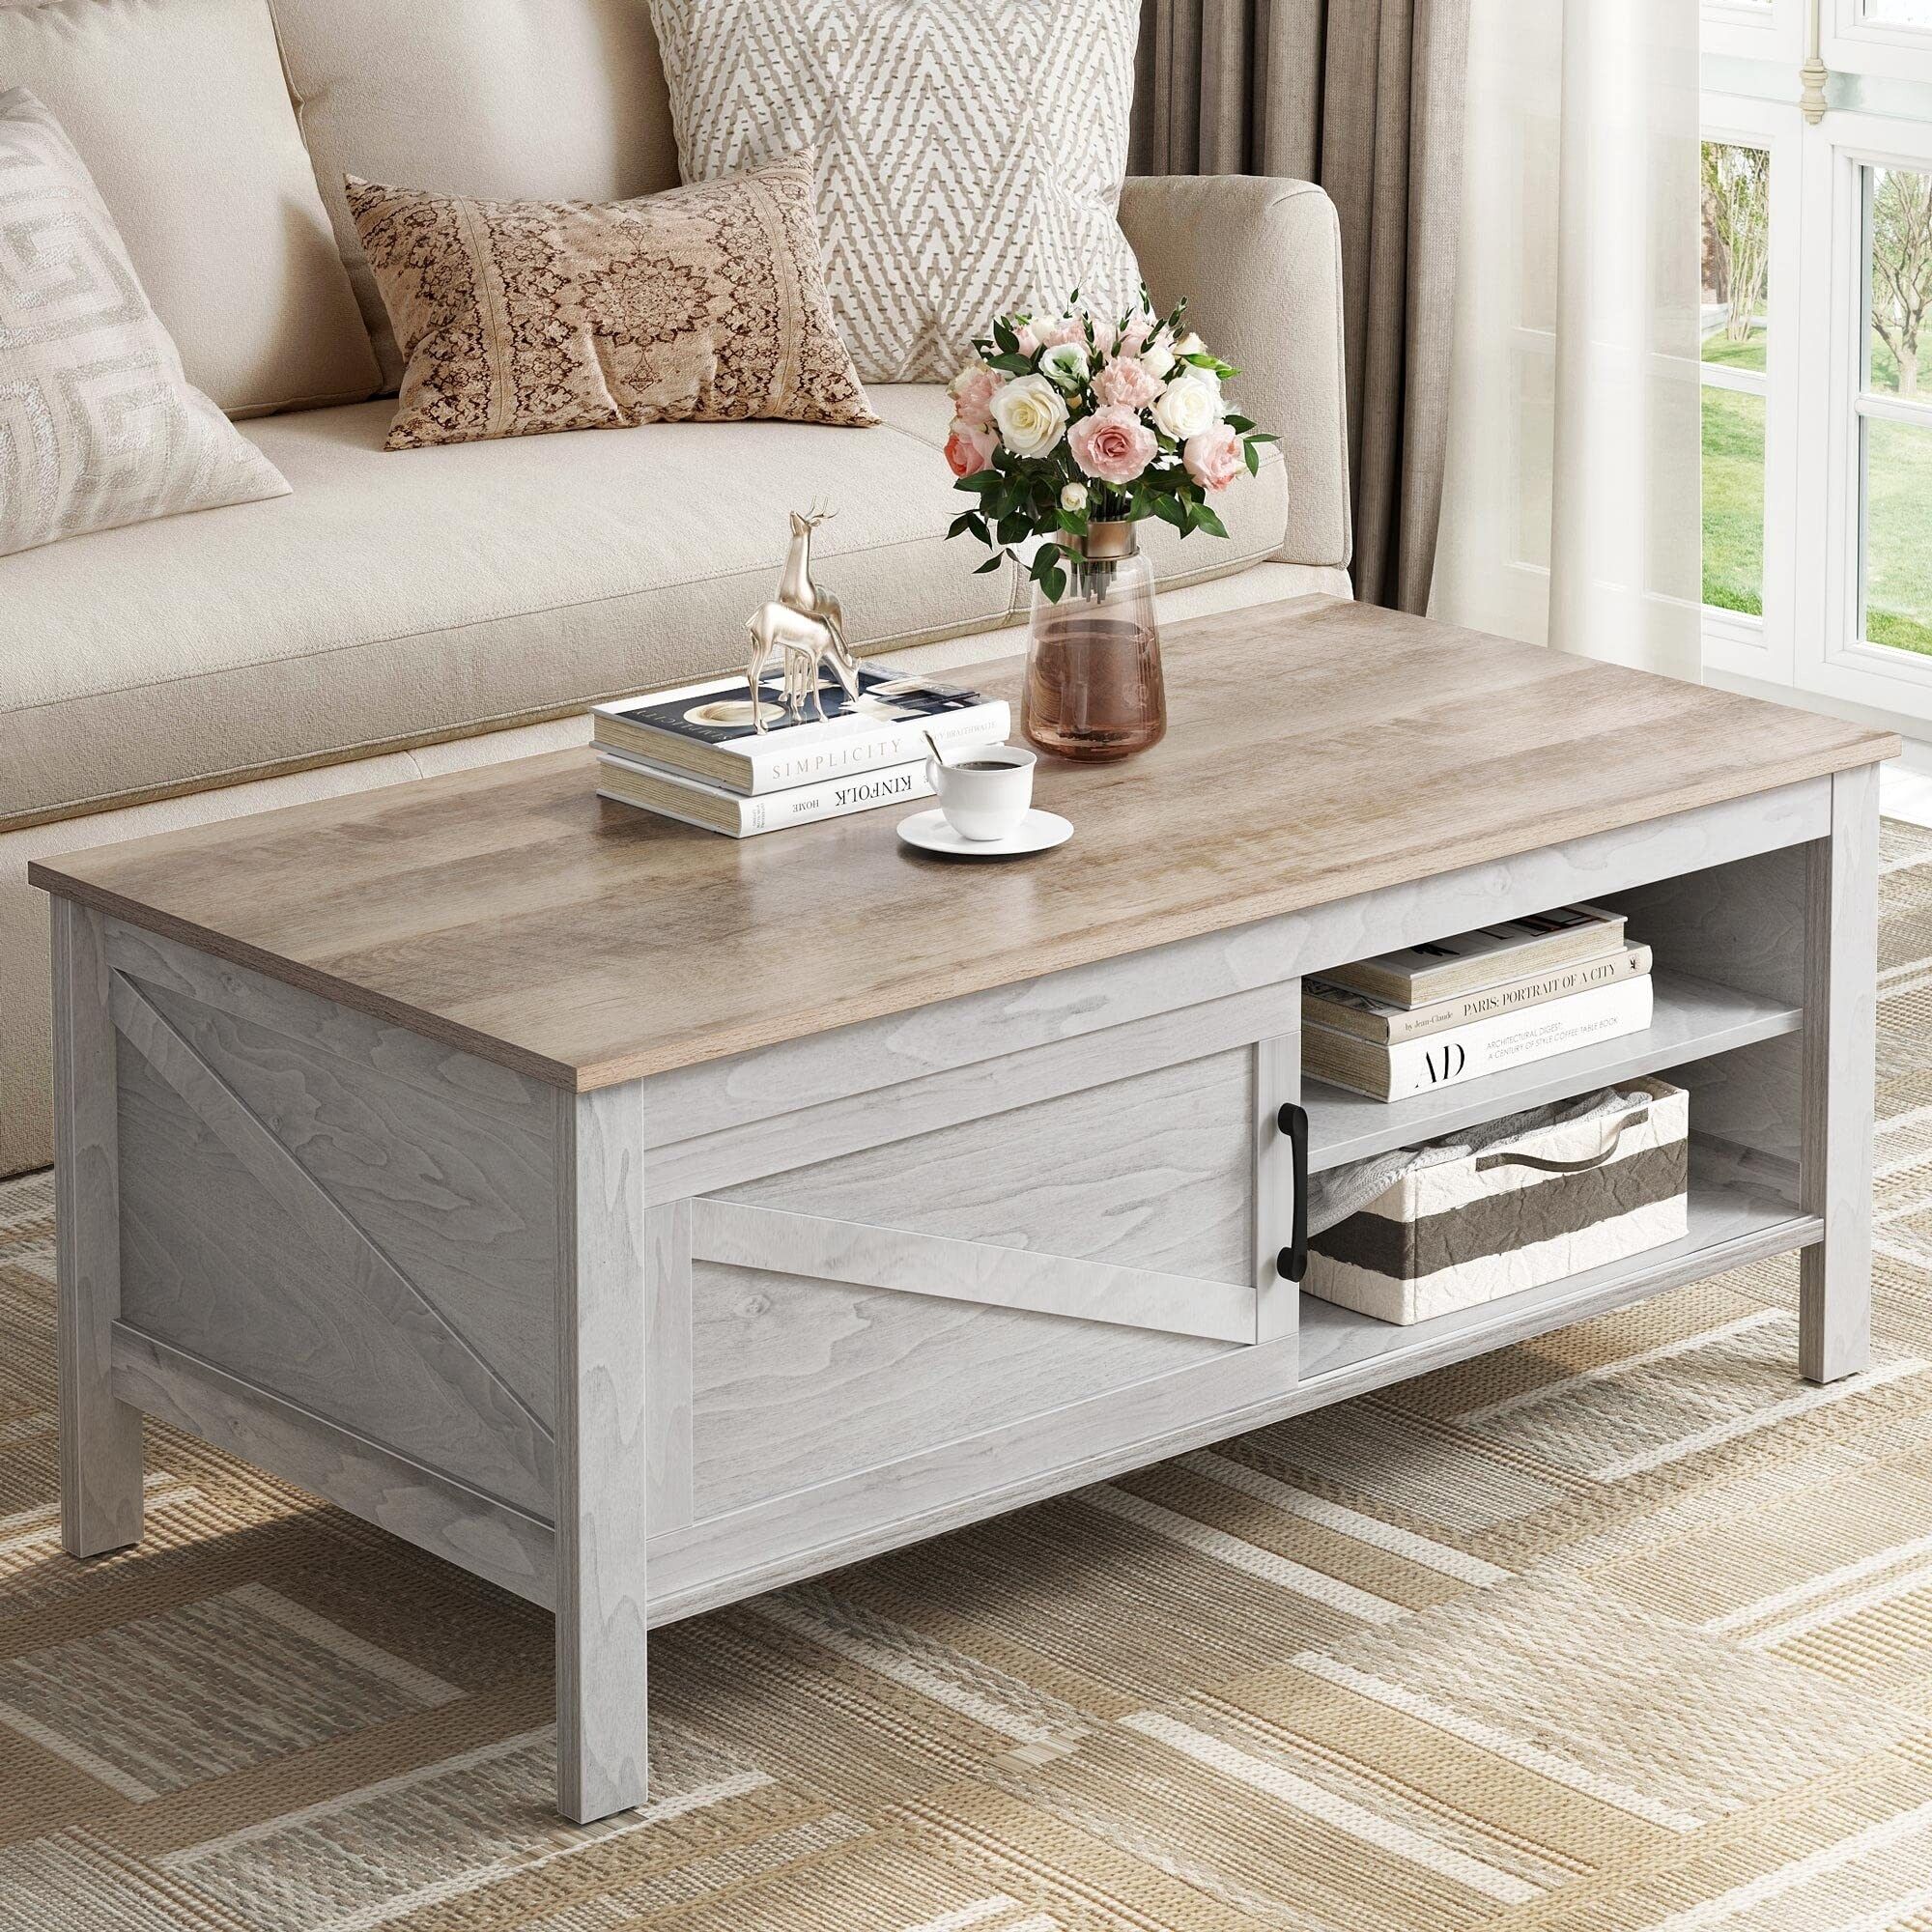 Coffee Table With Storage,Wood Coffee Table For Living Room With Sliding Barn  Door,Farmhouse Coffee Center Table For Home – Bed Bath & Beyond – 37841742 In Coffee Tables With Storage And Barn Doors (View 13 of 15)